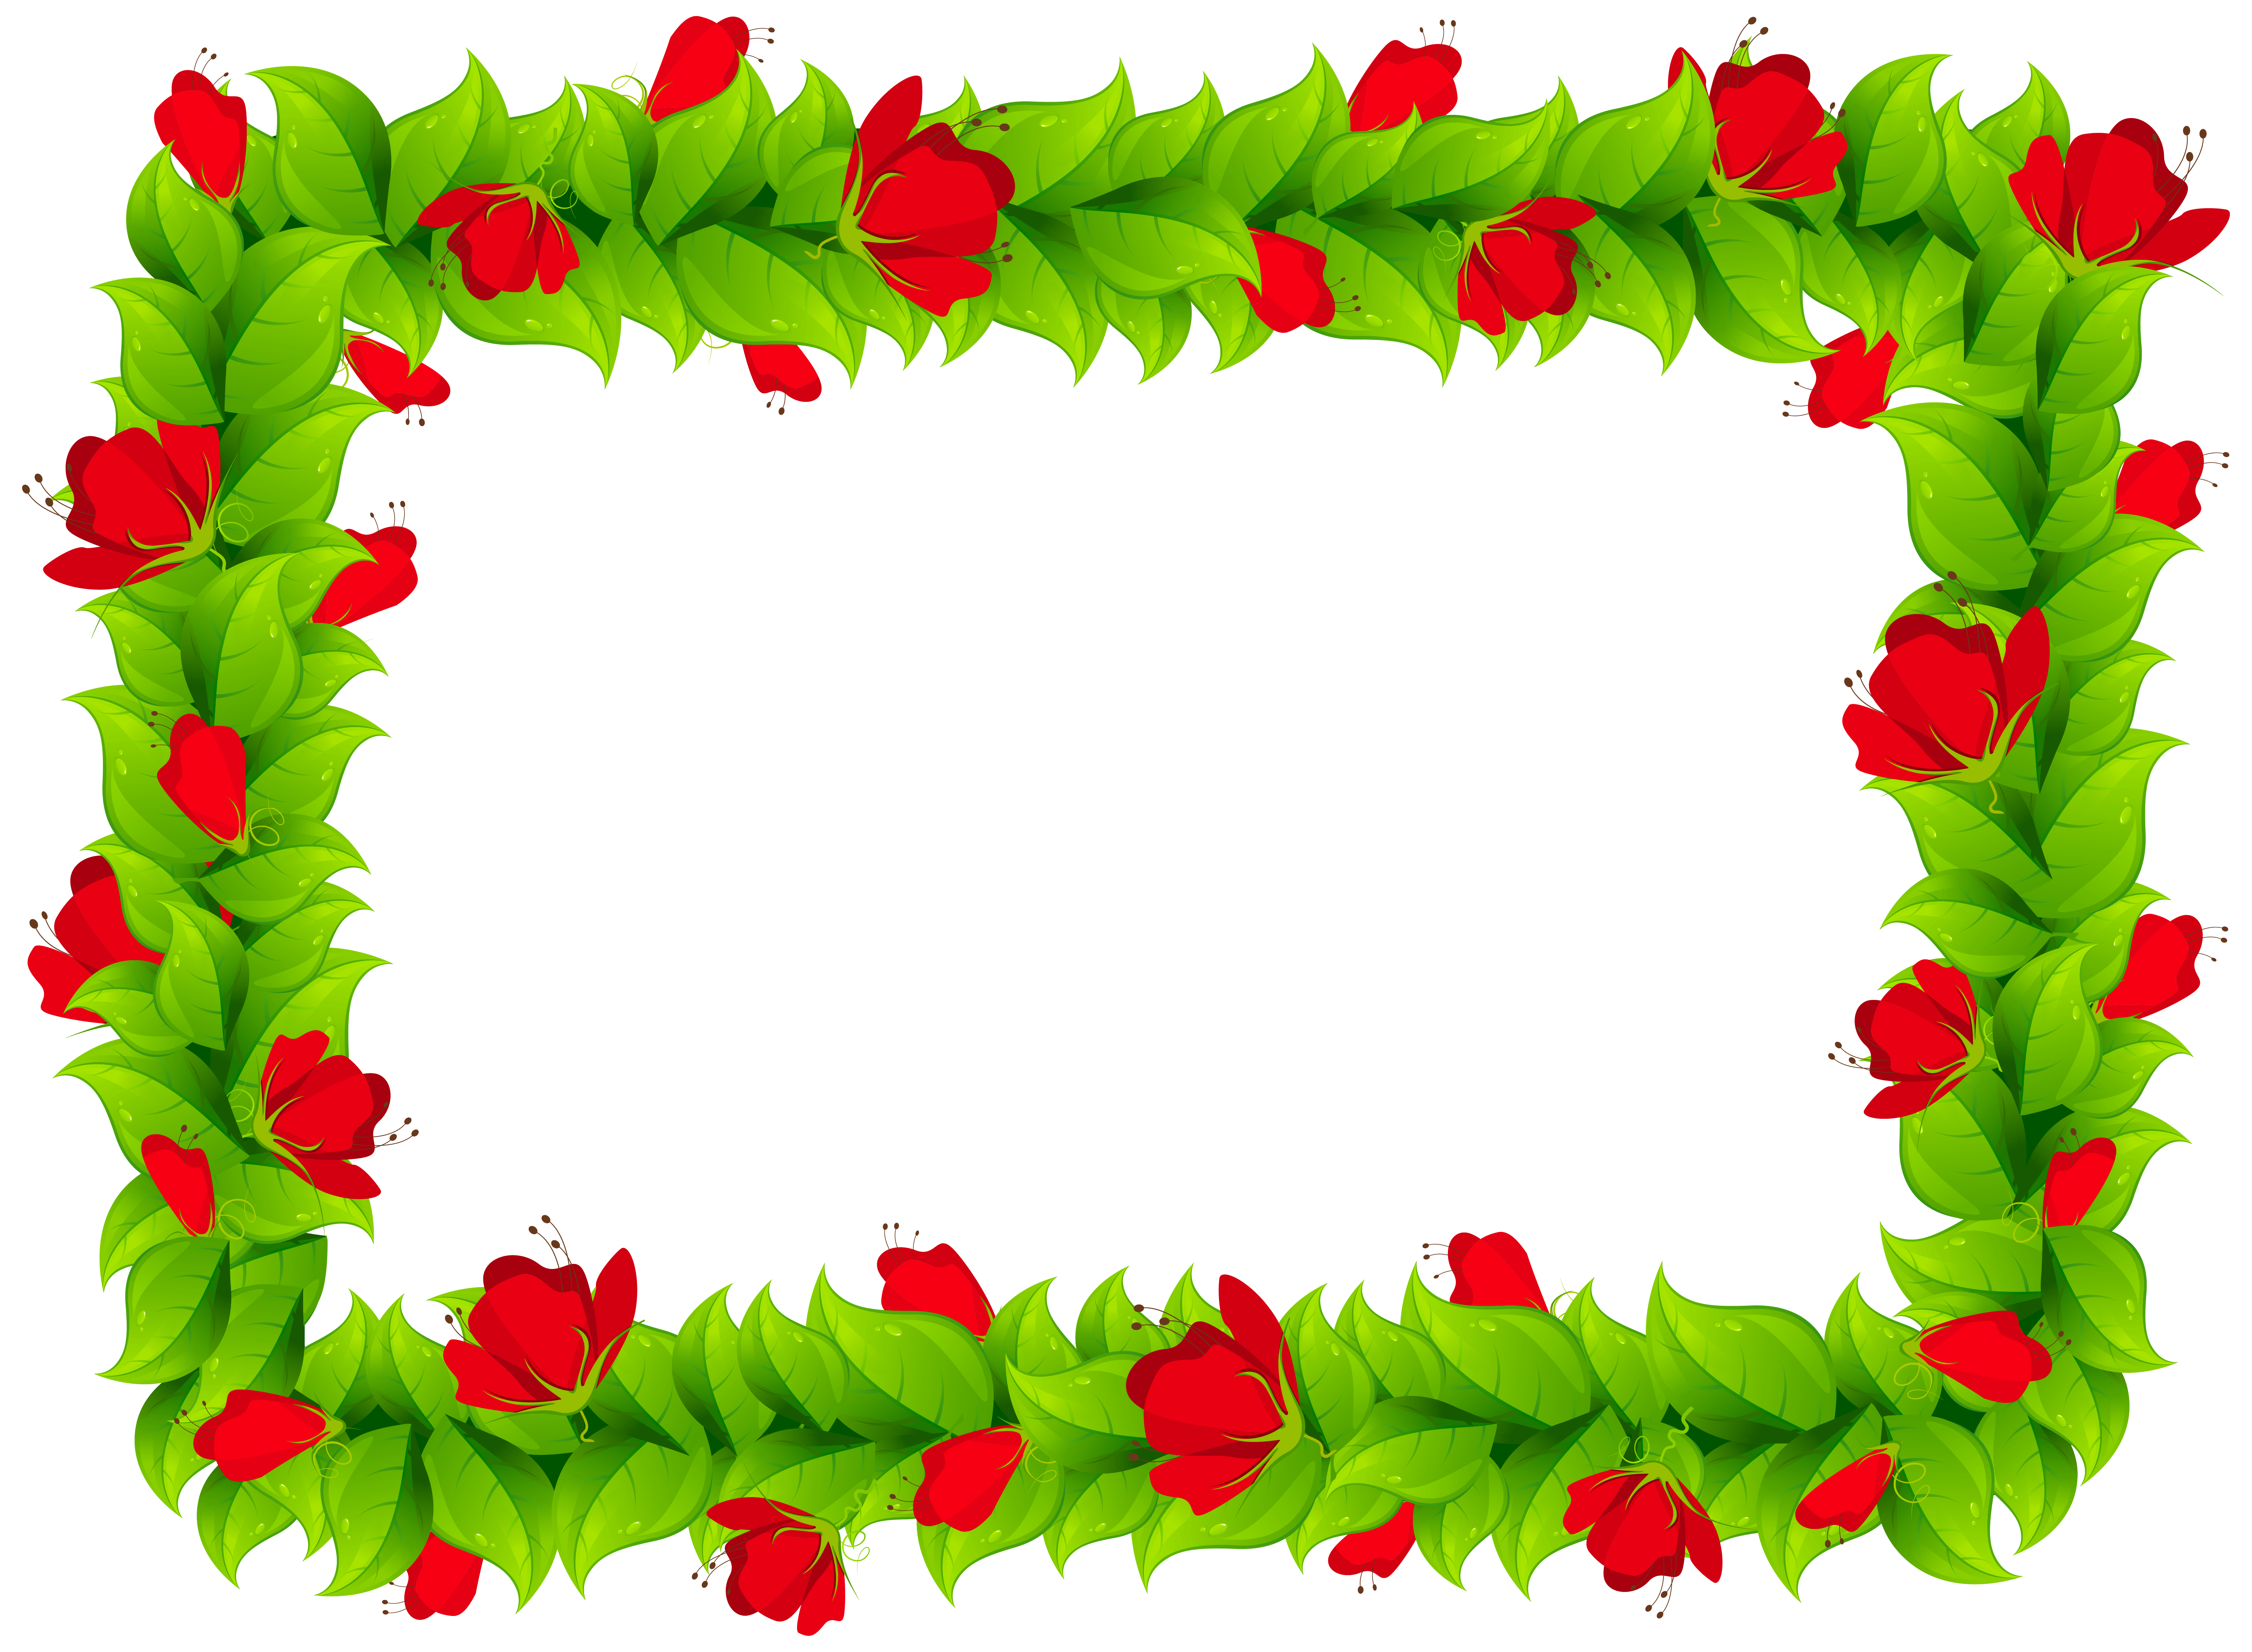 png clipart frame - photo #7